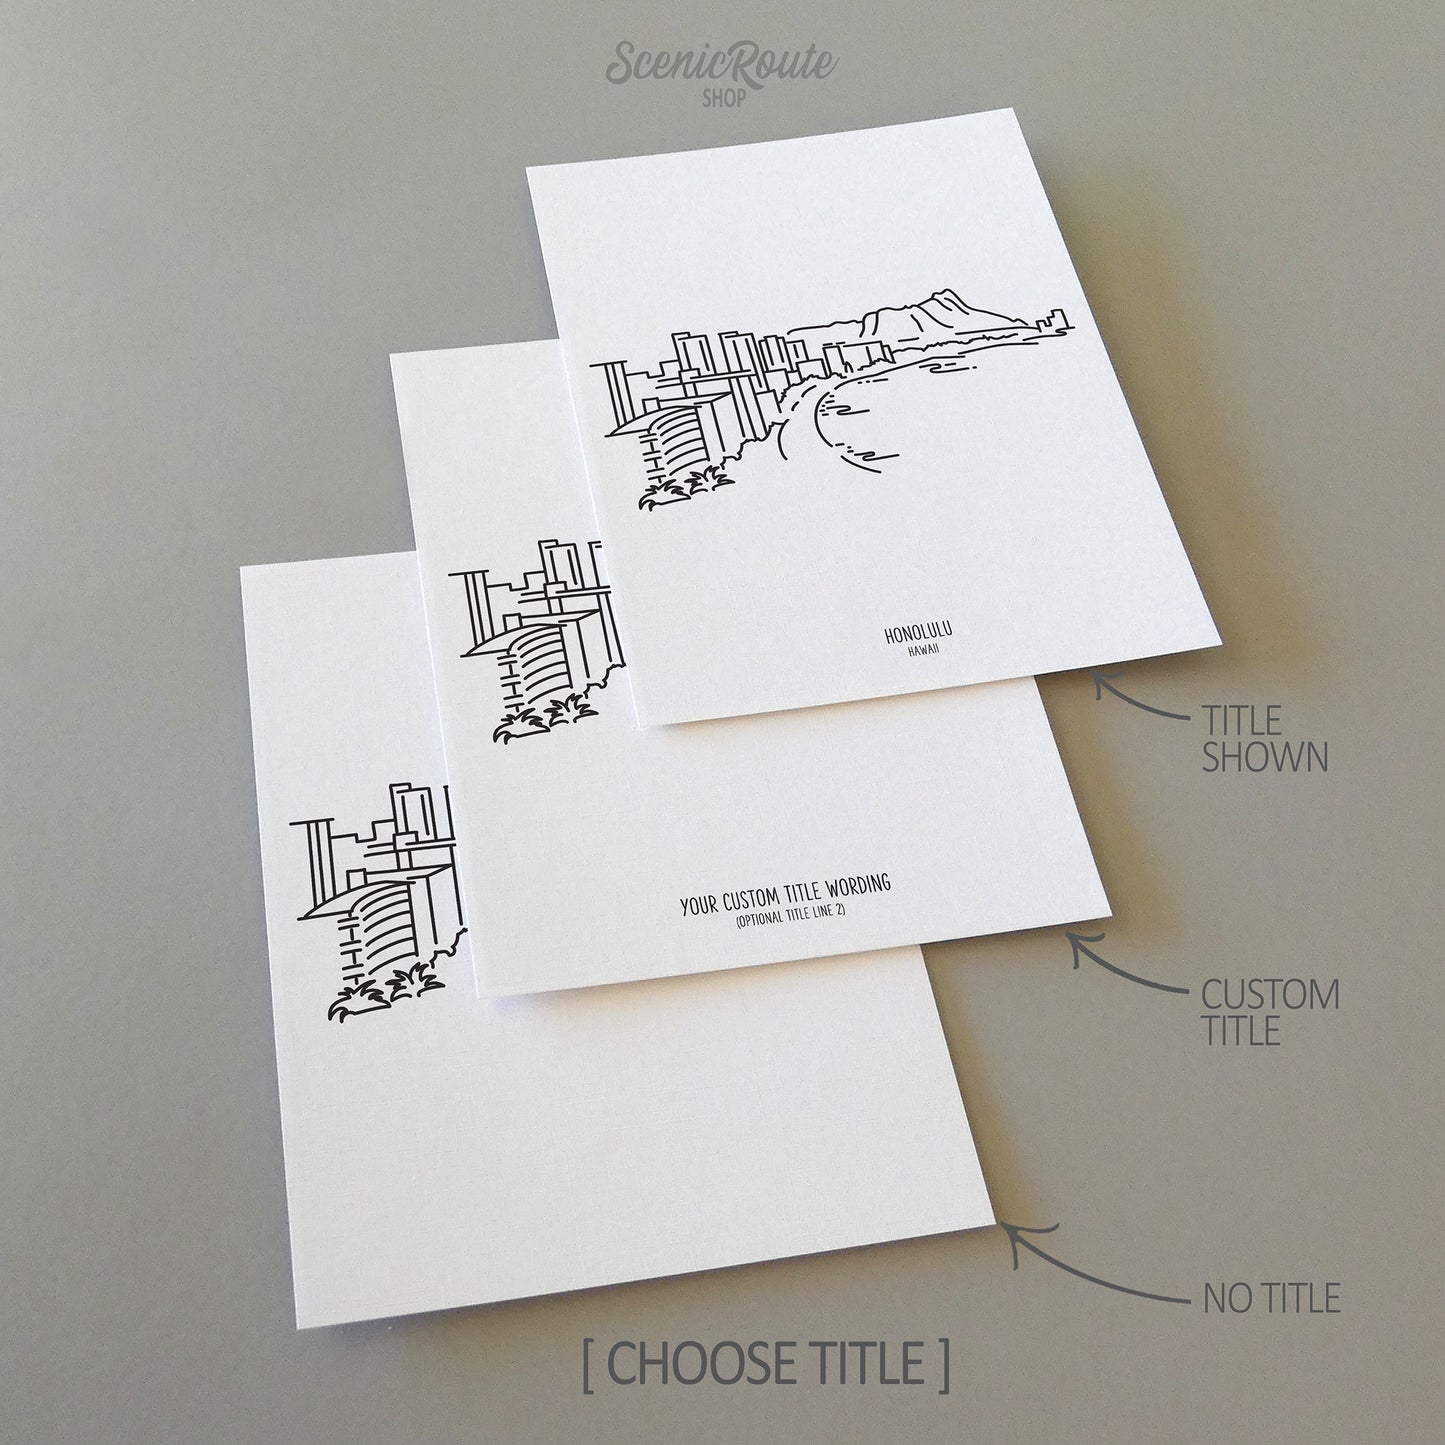 Three line art drawings of the Honolulu Hawaii Skyline on white linen paper with a gray background. The pieces are shown with title options that can be chosen and personalized.